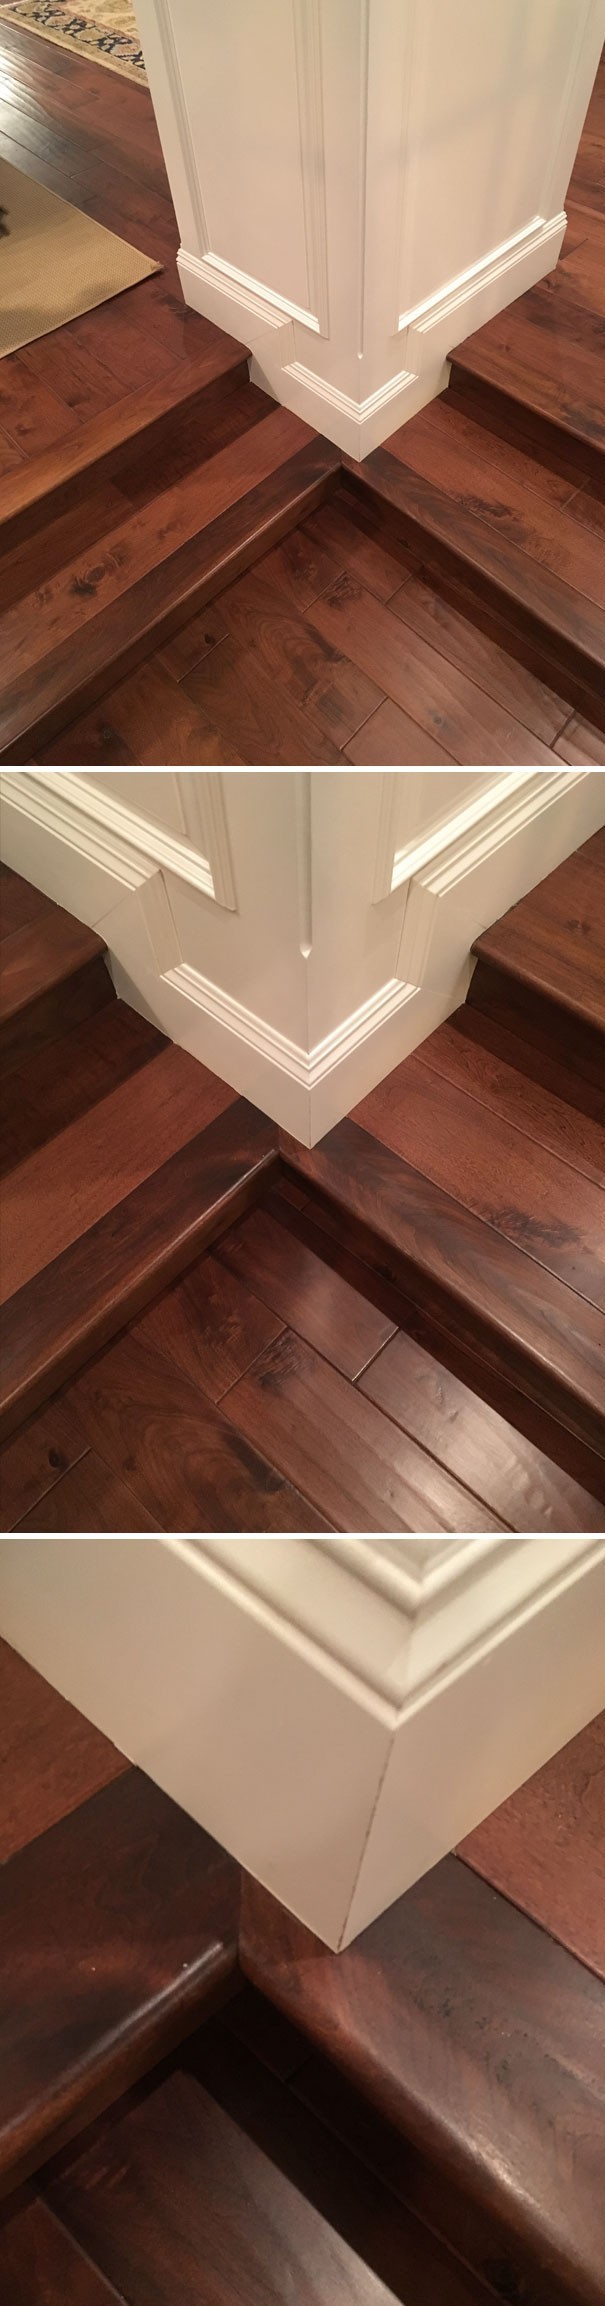 "It took me five years to notice this detail in my home. Now I cannot stand to look at it!"